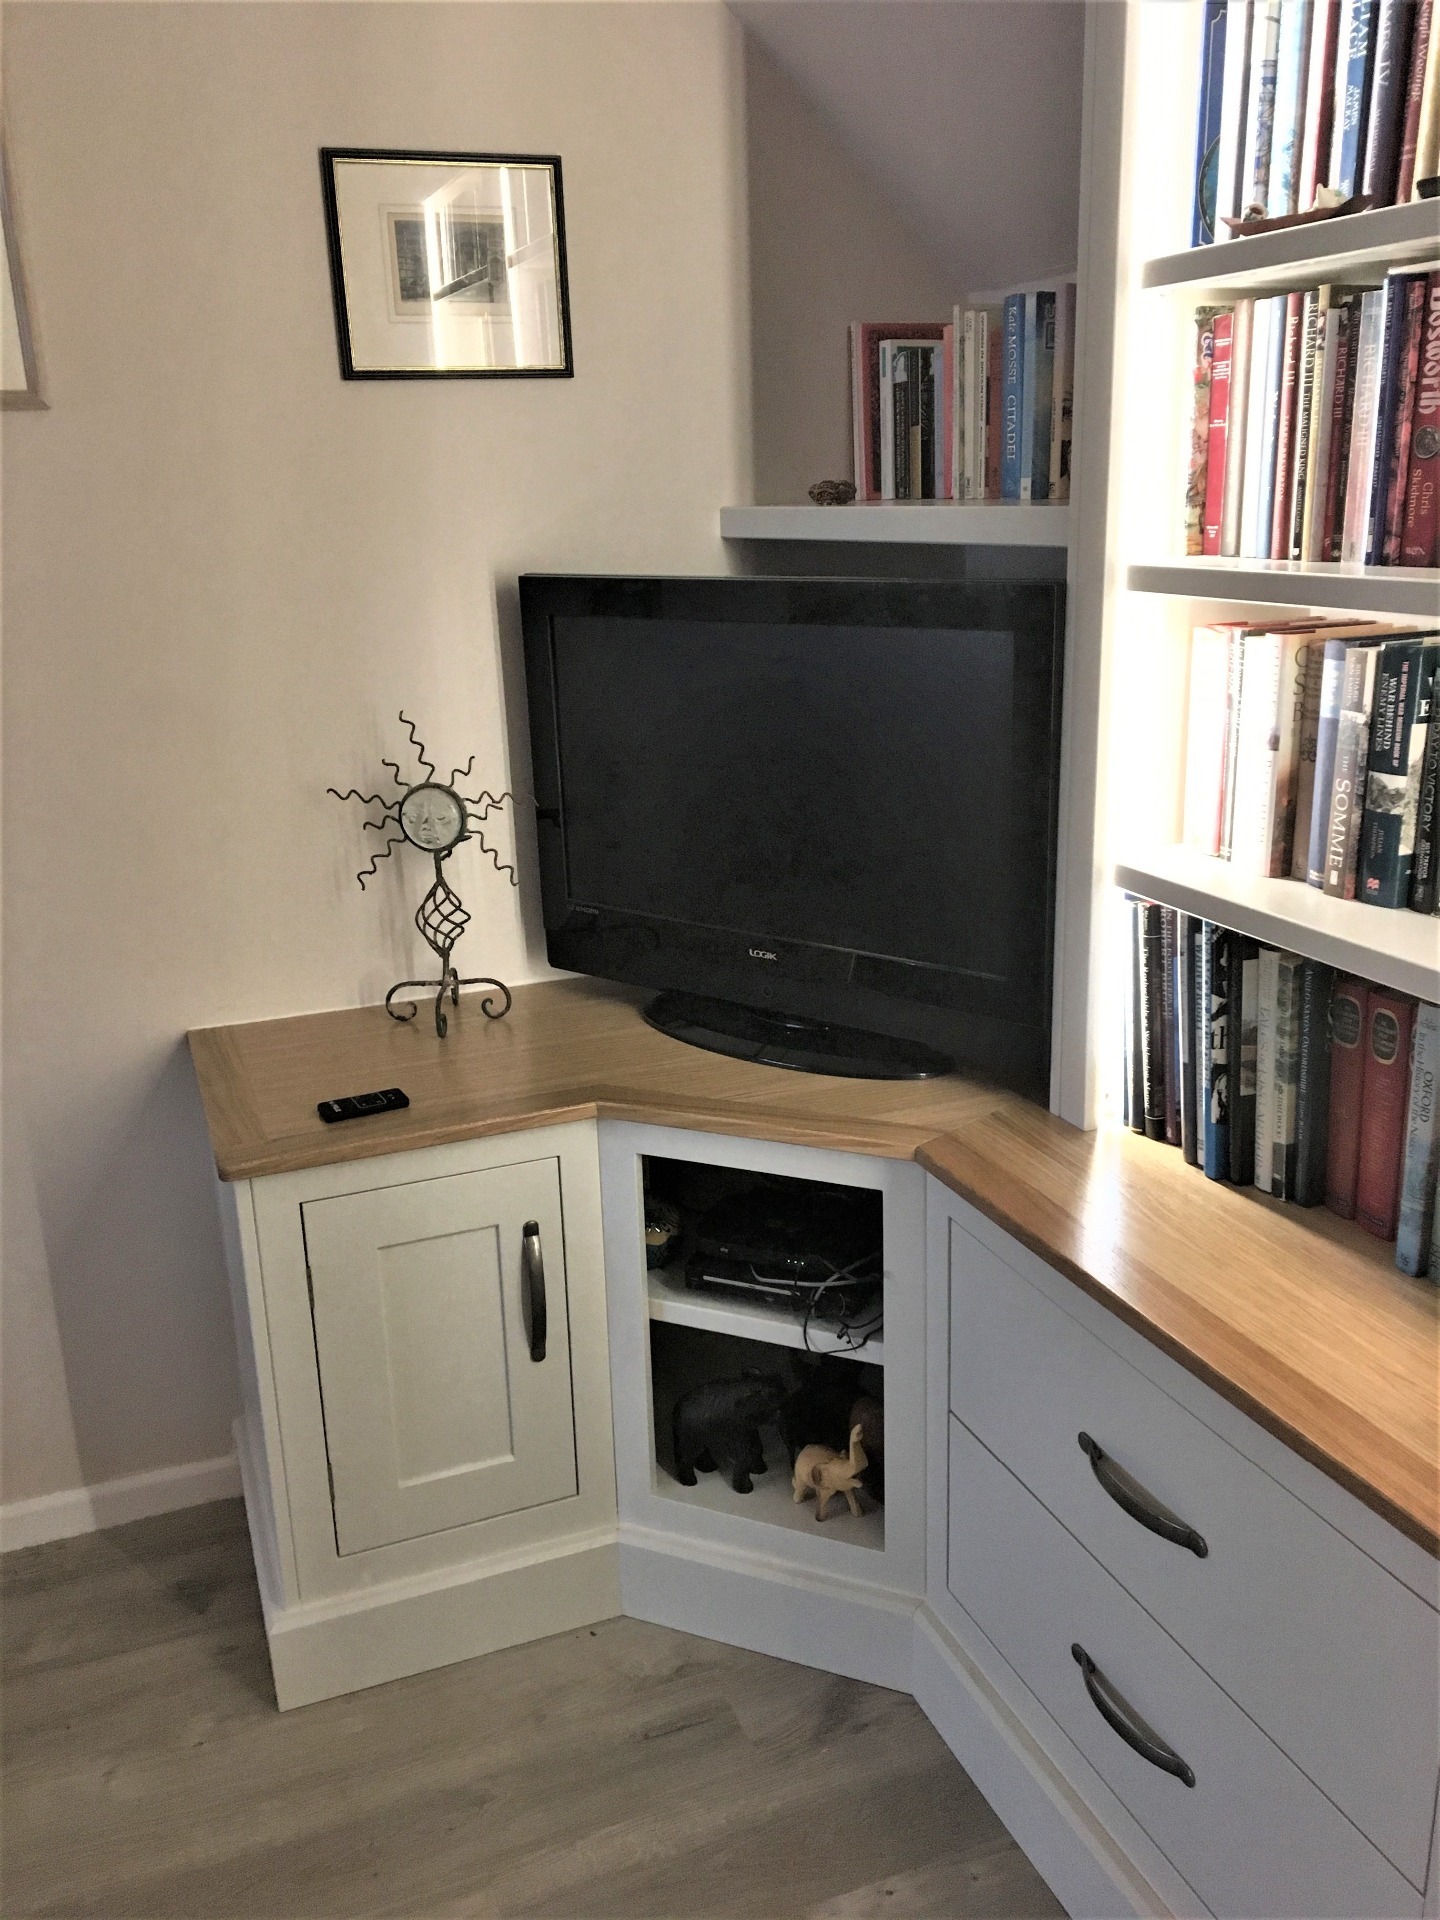 Bespoke media centre cabinets and shelving